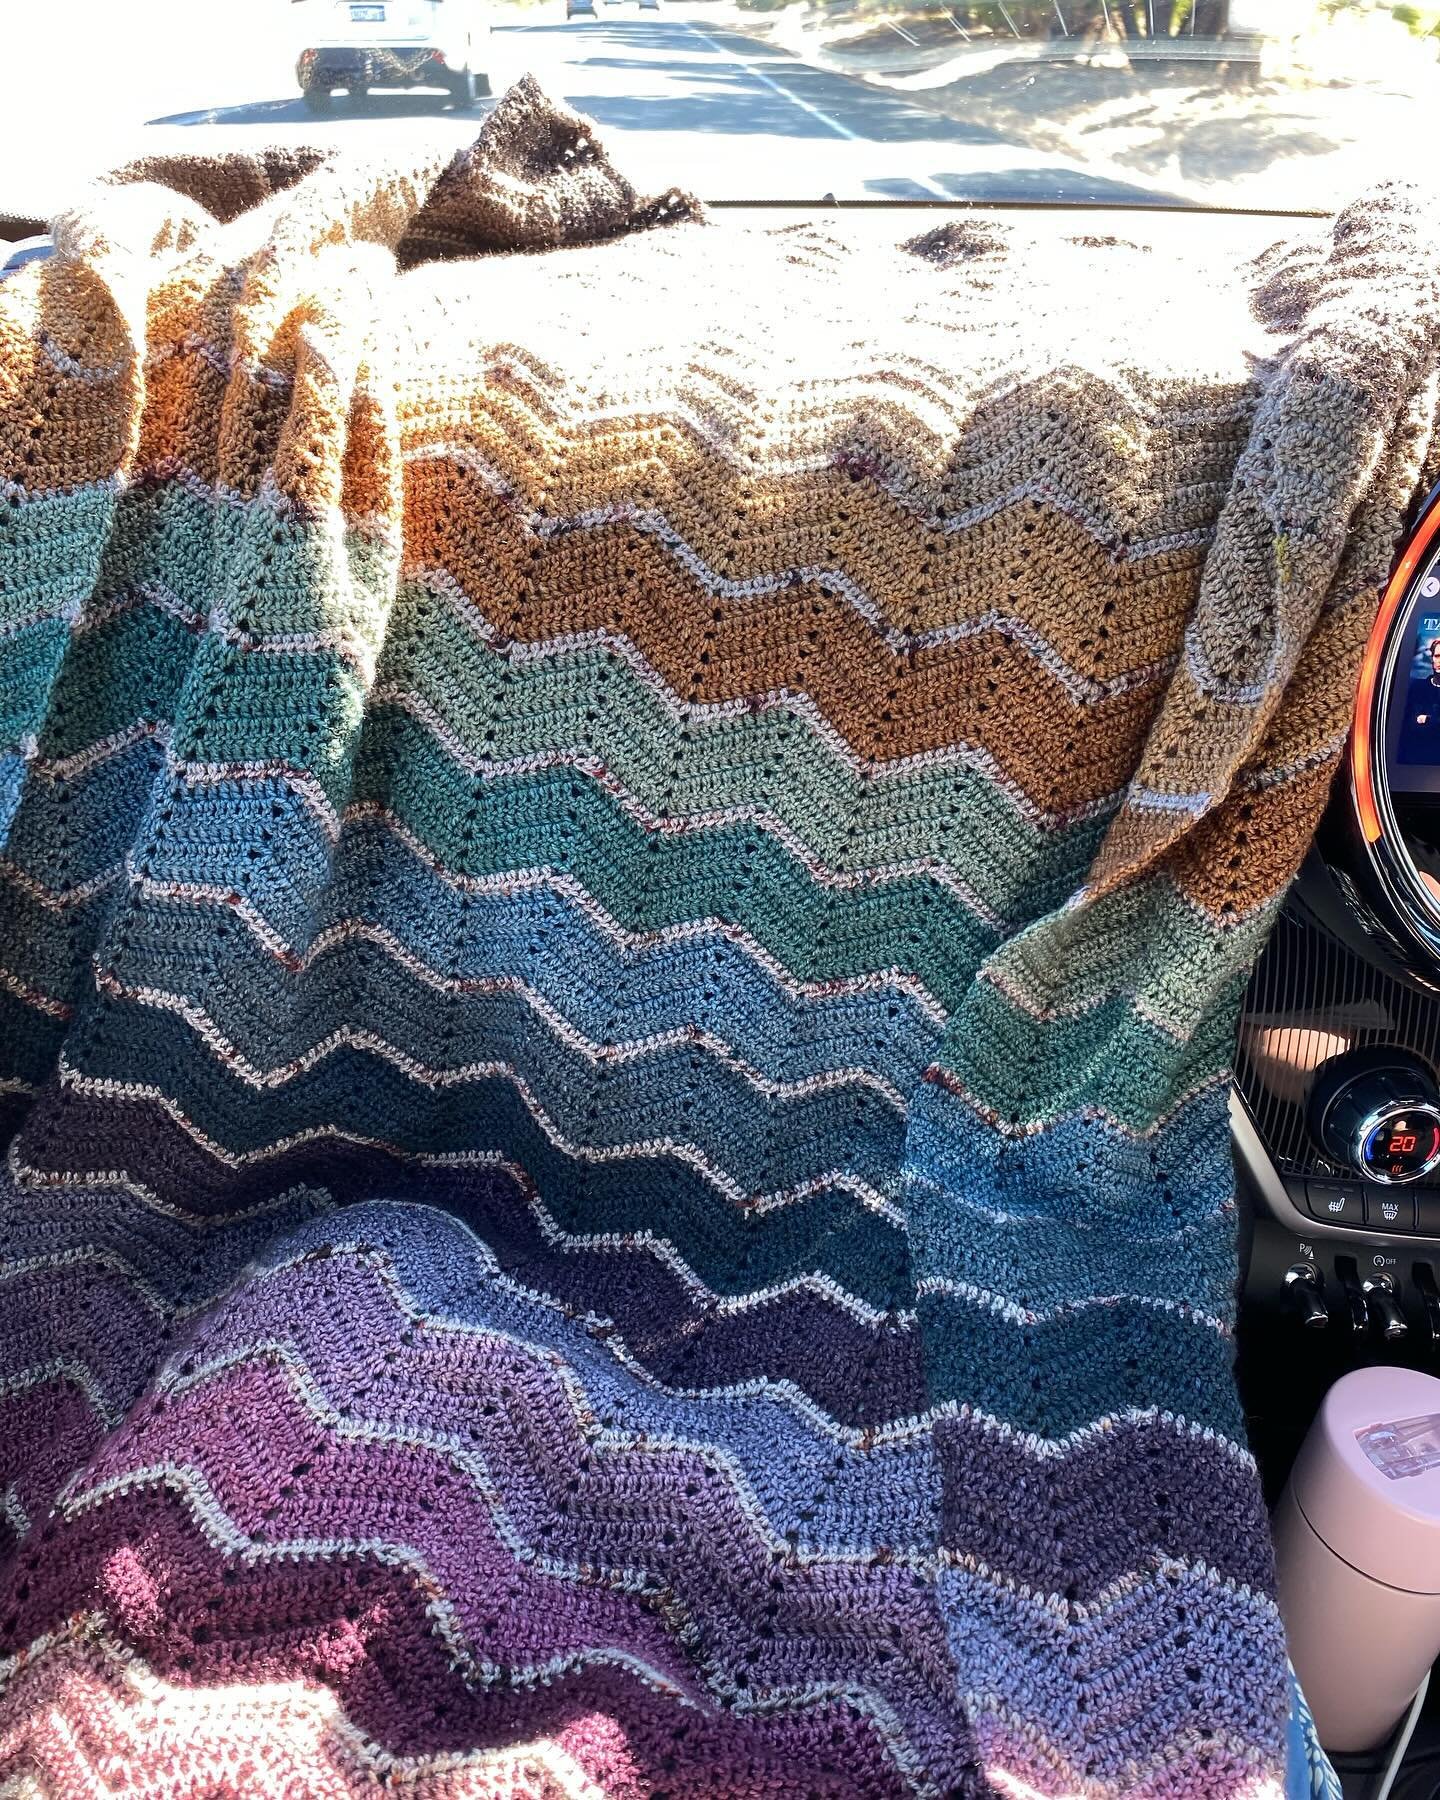 I am busy trying to finish my blanket using @louielolayarns from her beautiful 2023 Gingerhaus advent calendar.  This road trip to Perth is some good crochet time. 

I am keen to start some new makes for the little people in my life like a special li